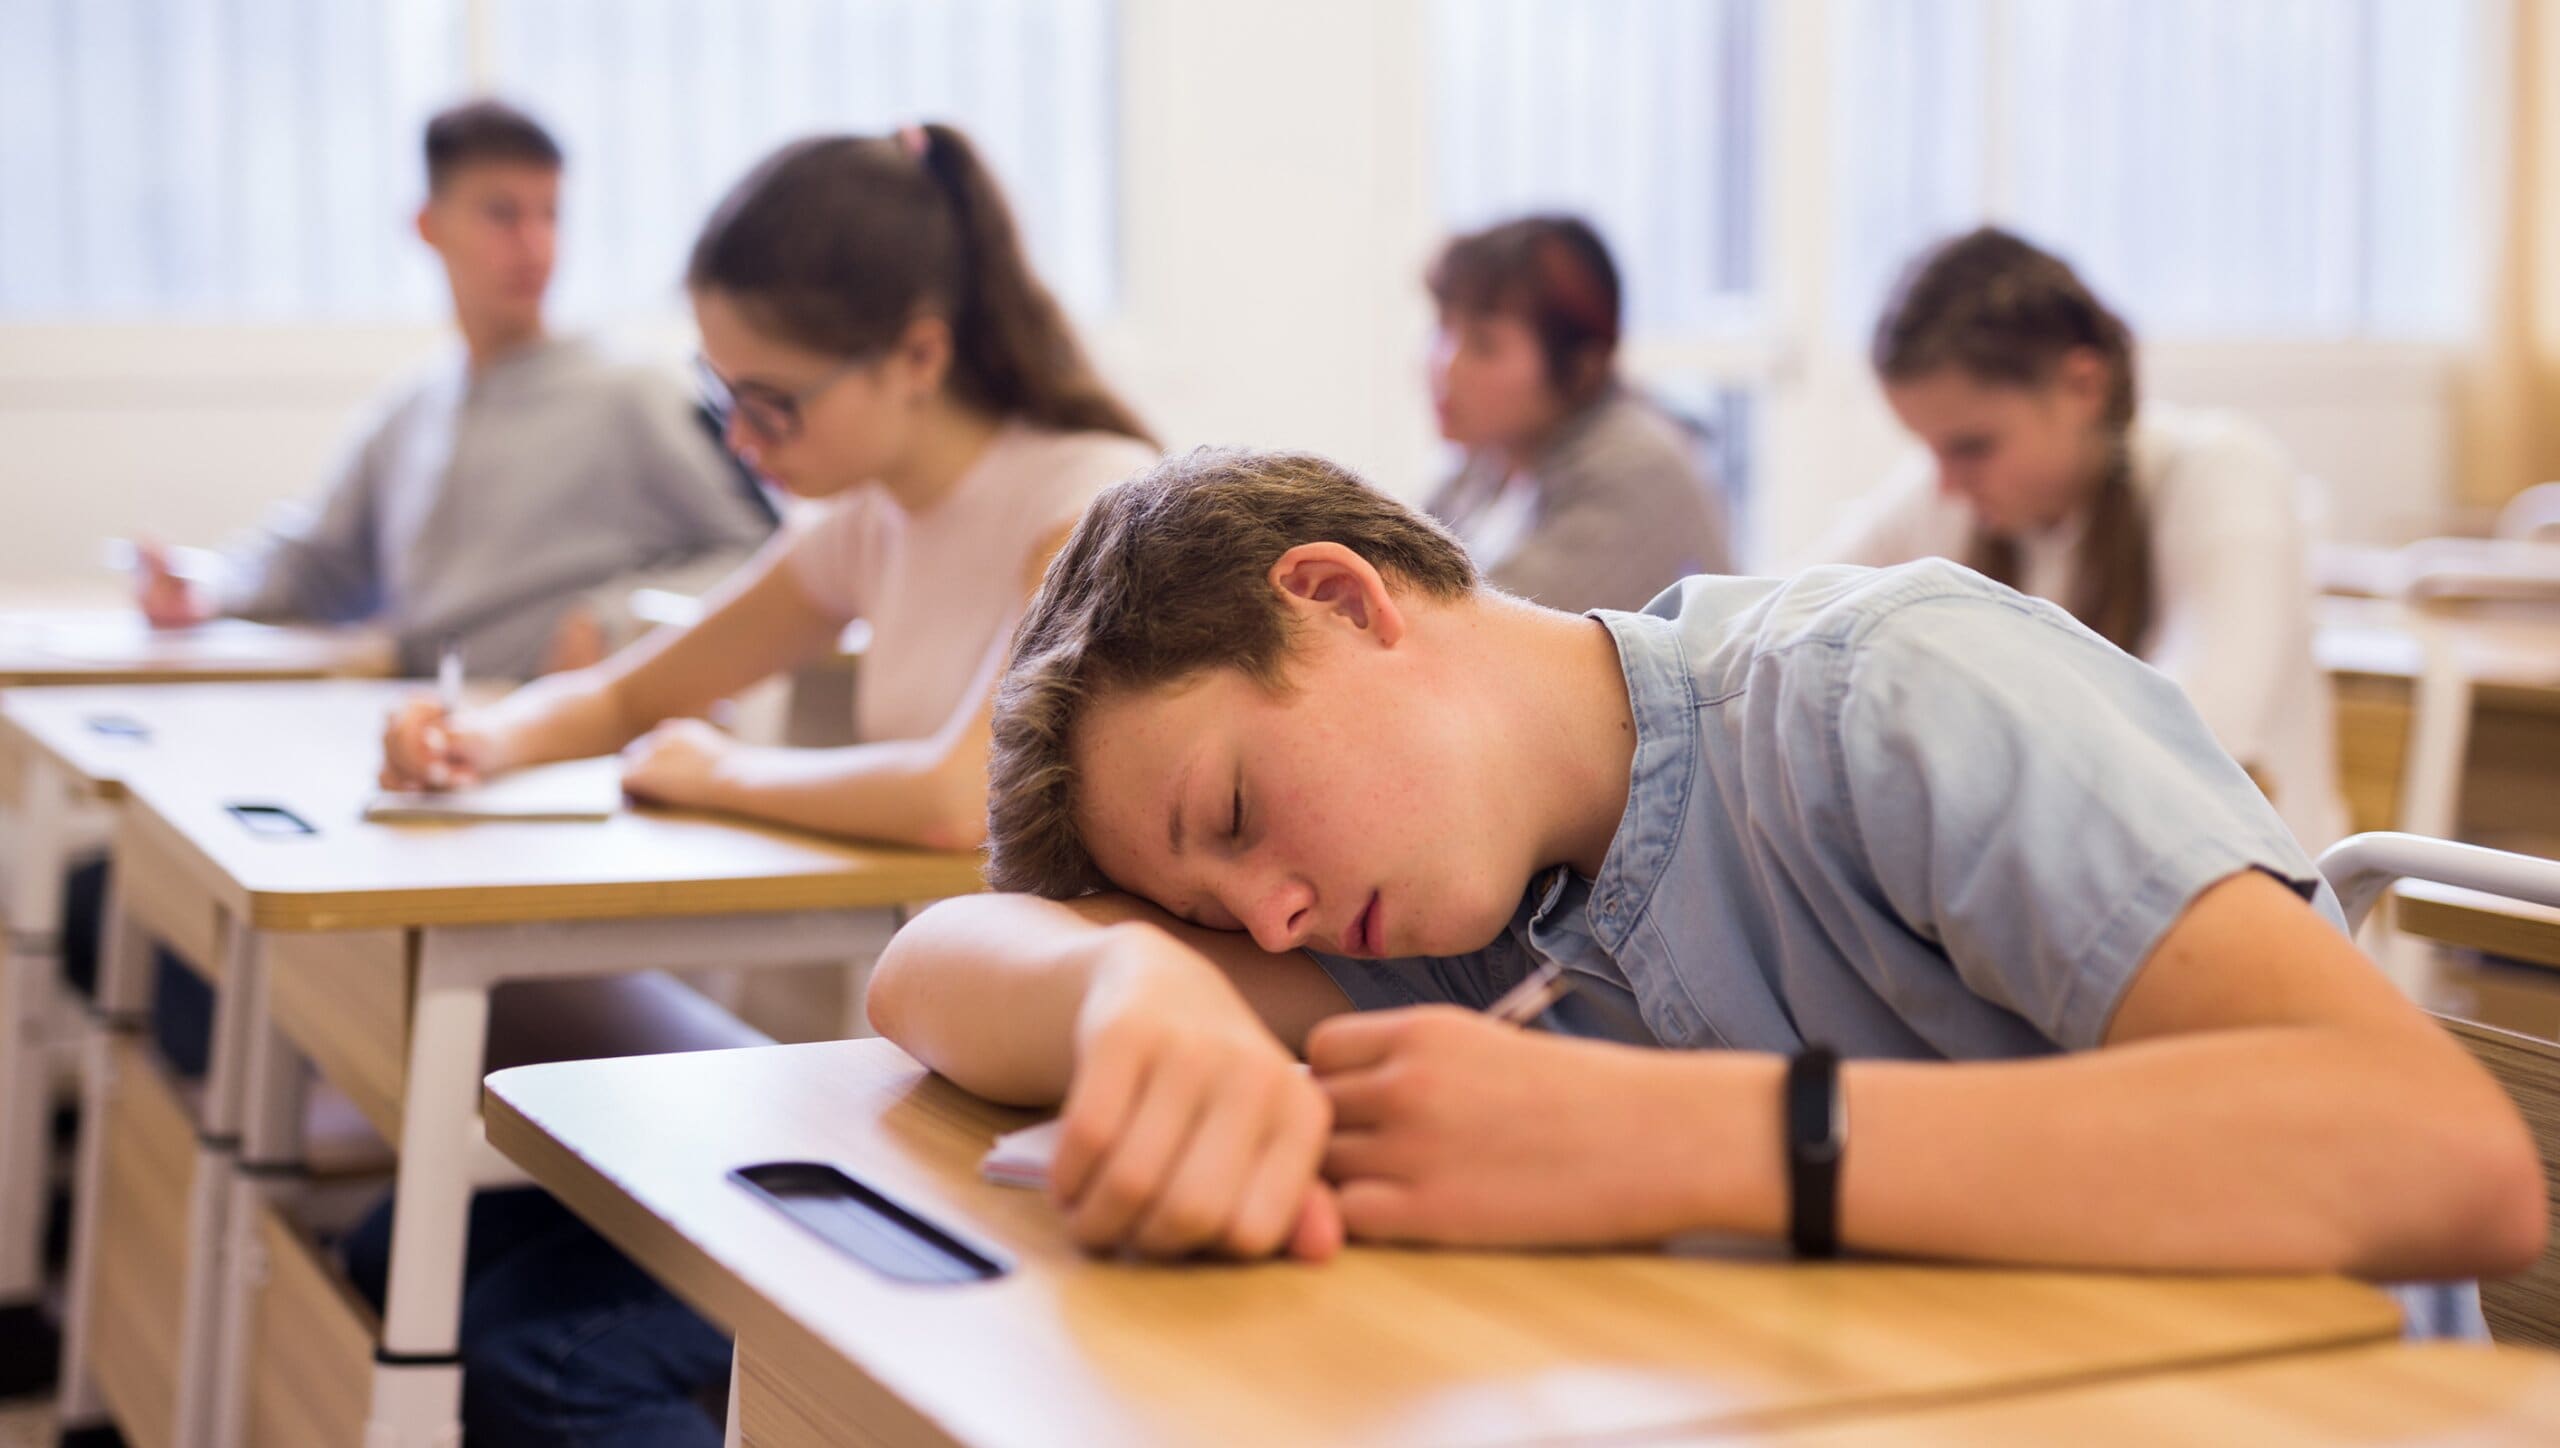 Tired teenage boy who needs more sleep, asleep at his school desk, with blurred classmates in the background.